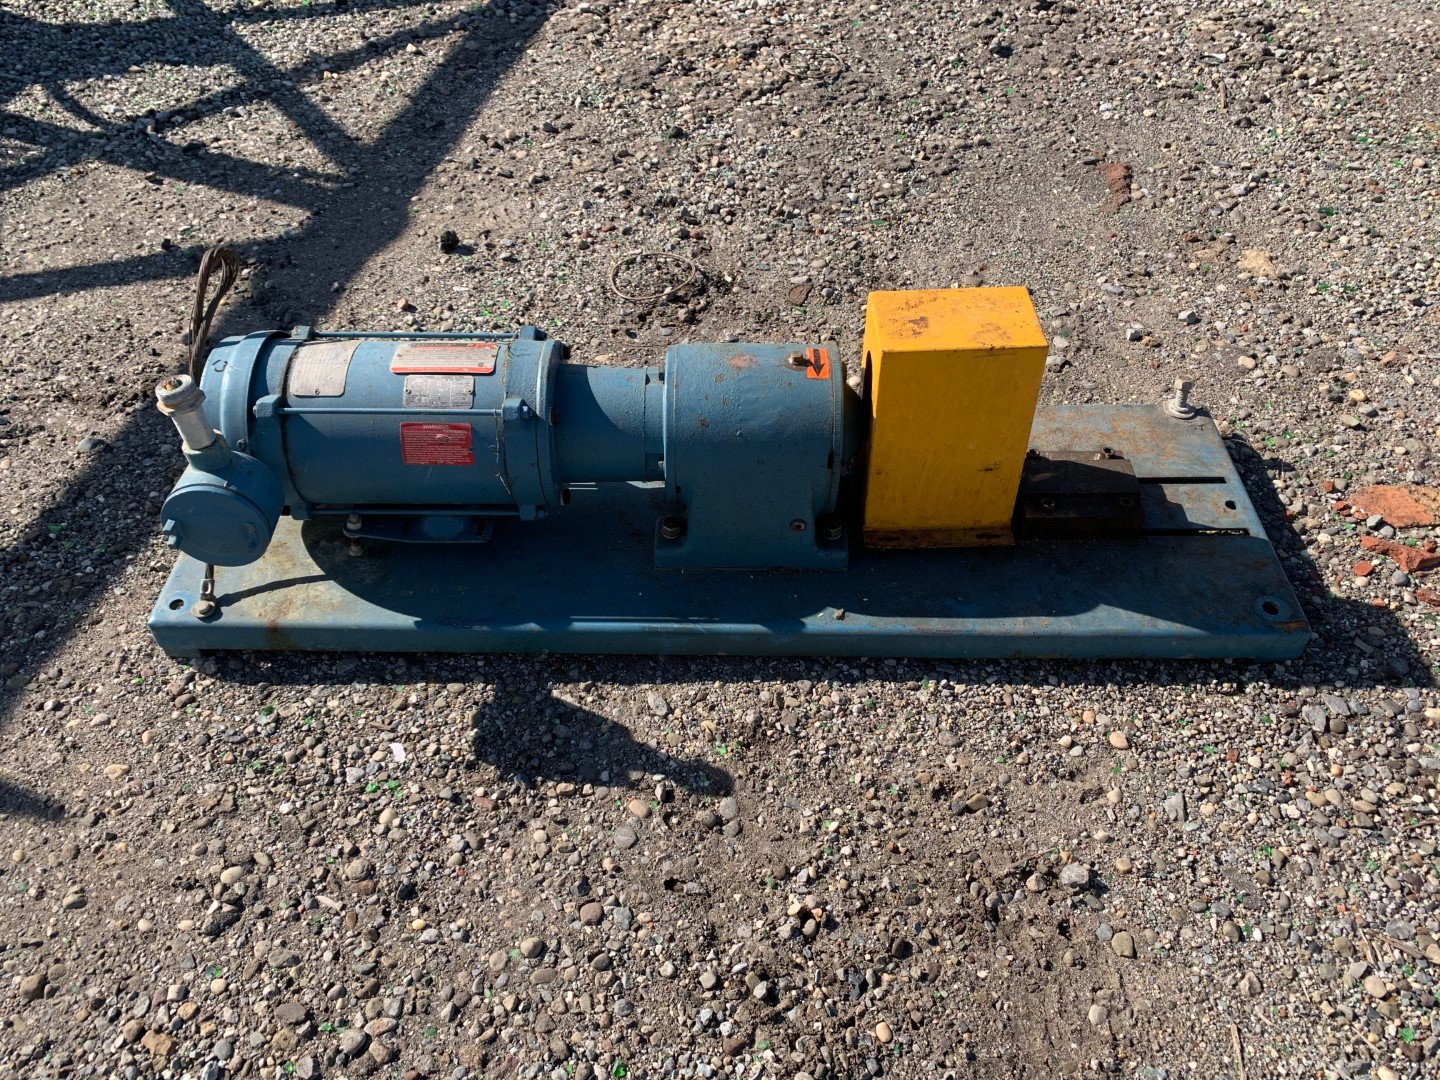 Zenith Meter Pump Base only with Motor, 2 HP